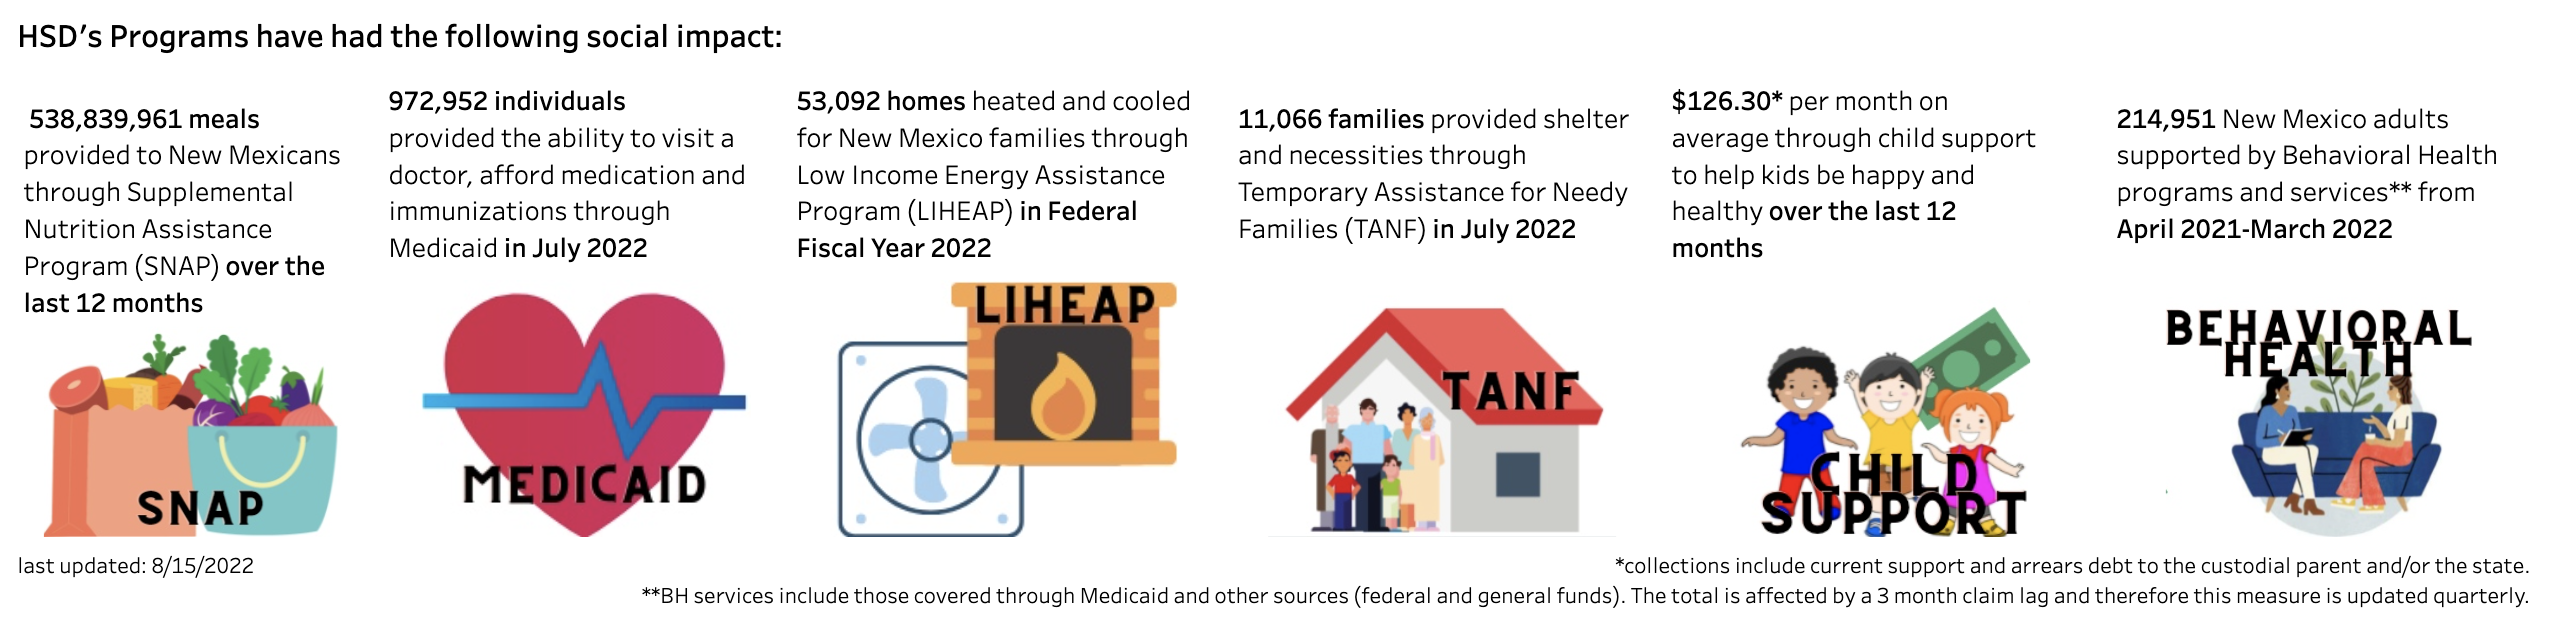 Social impact totals for SNAP, Medicaid, LIHEAP, TANF, Child Support, and Behavioral Health Programs with images representing each program.